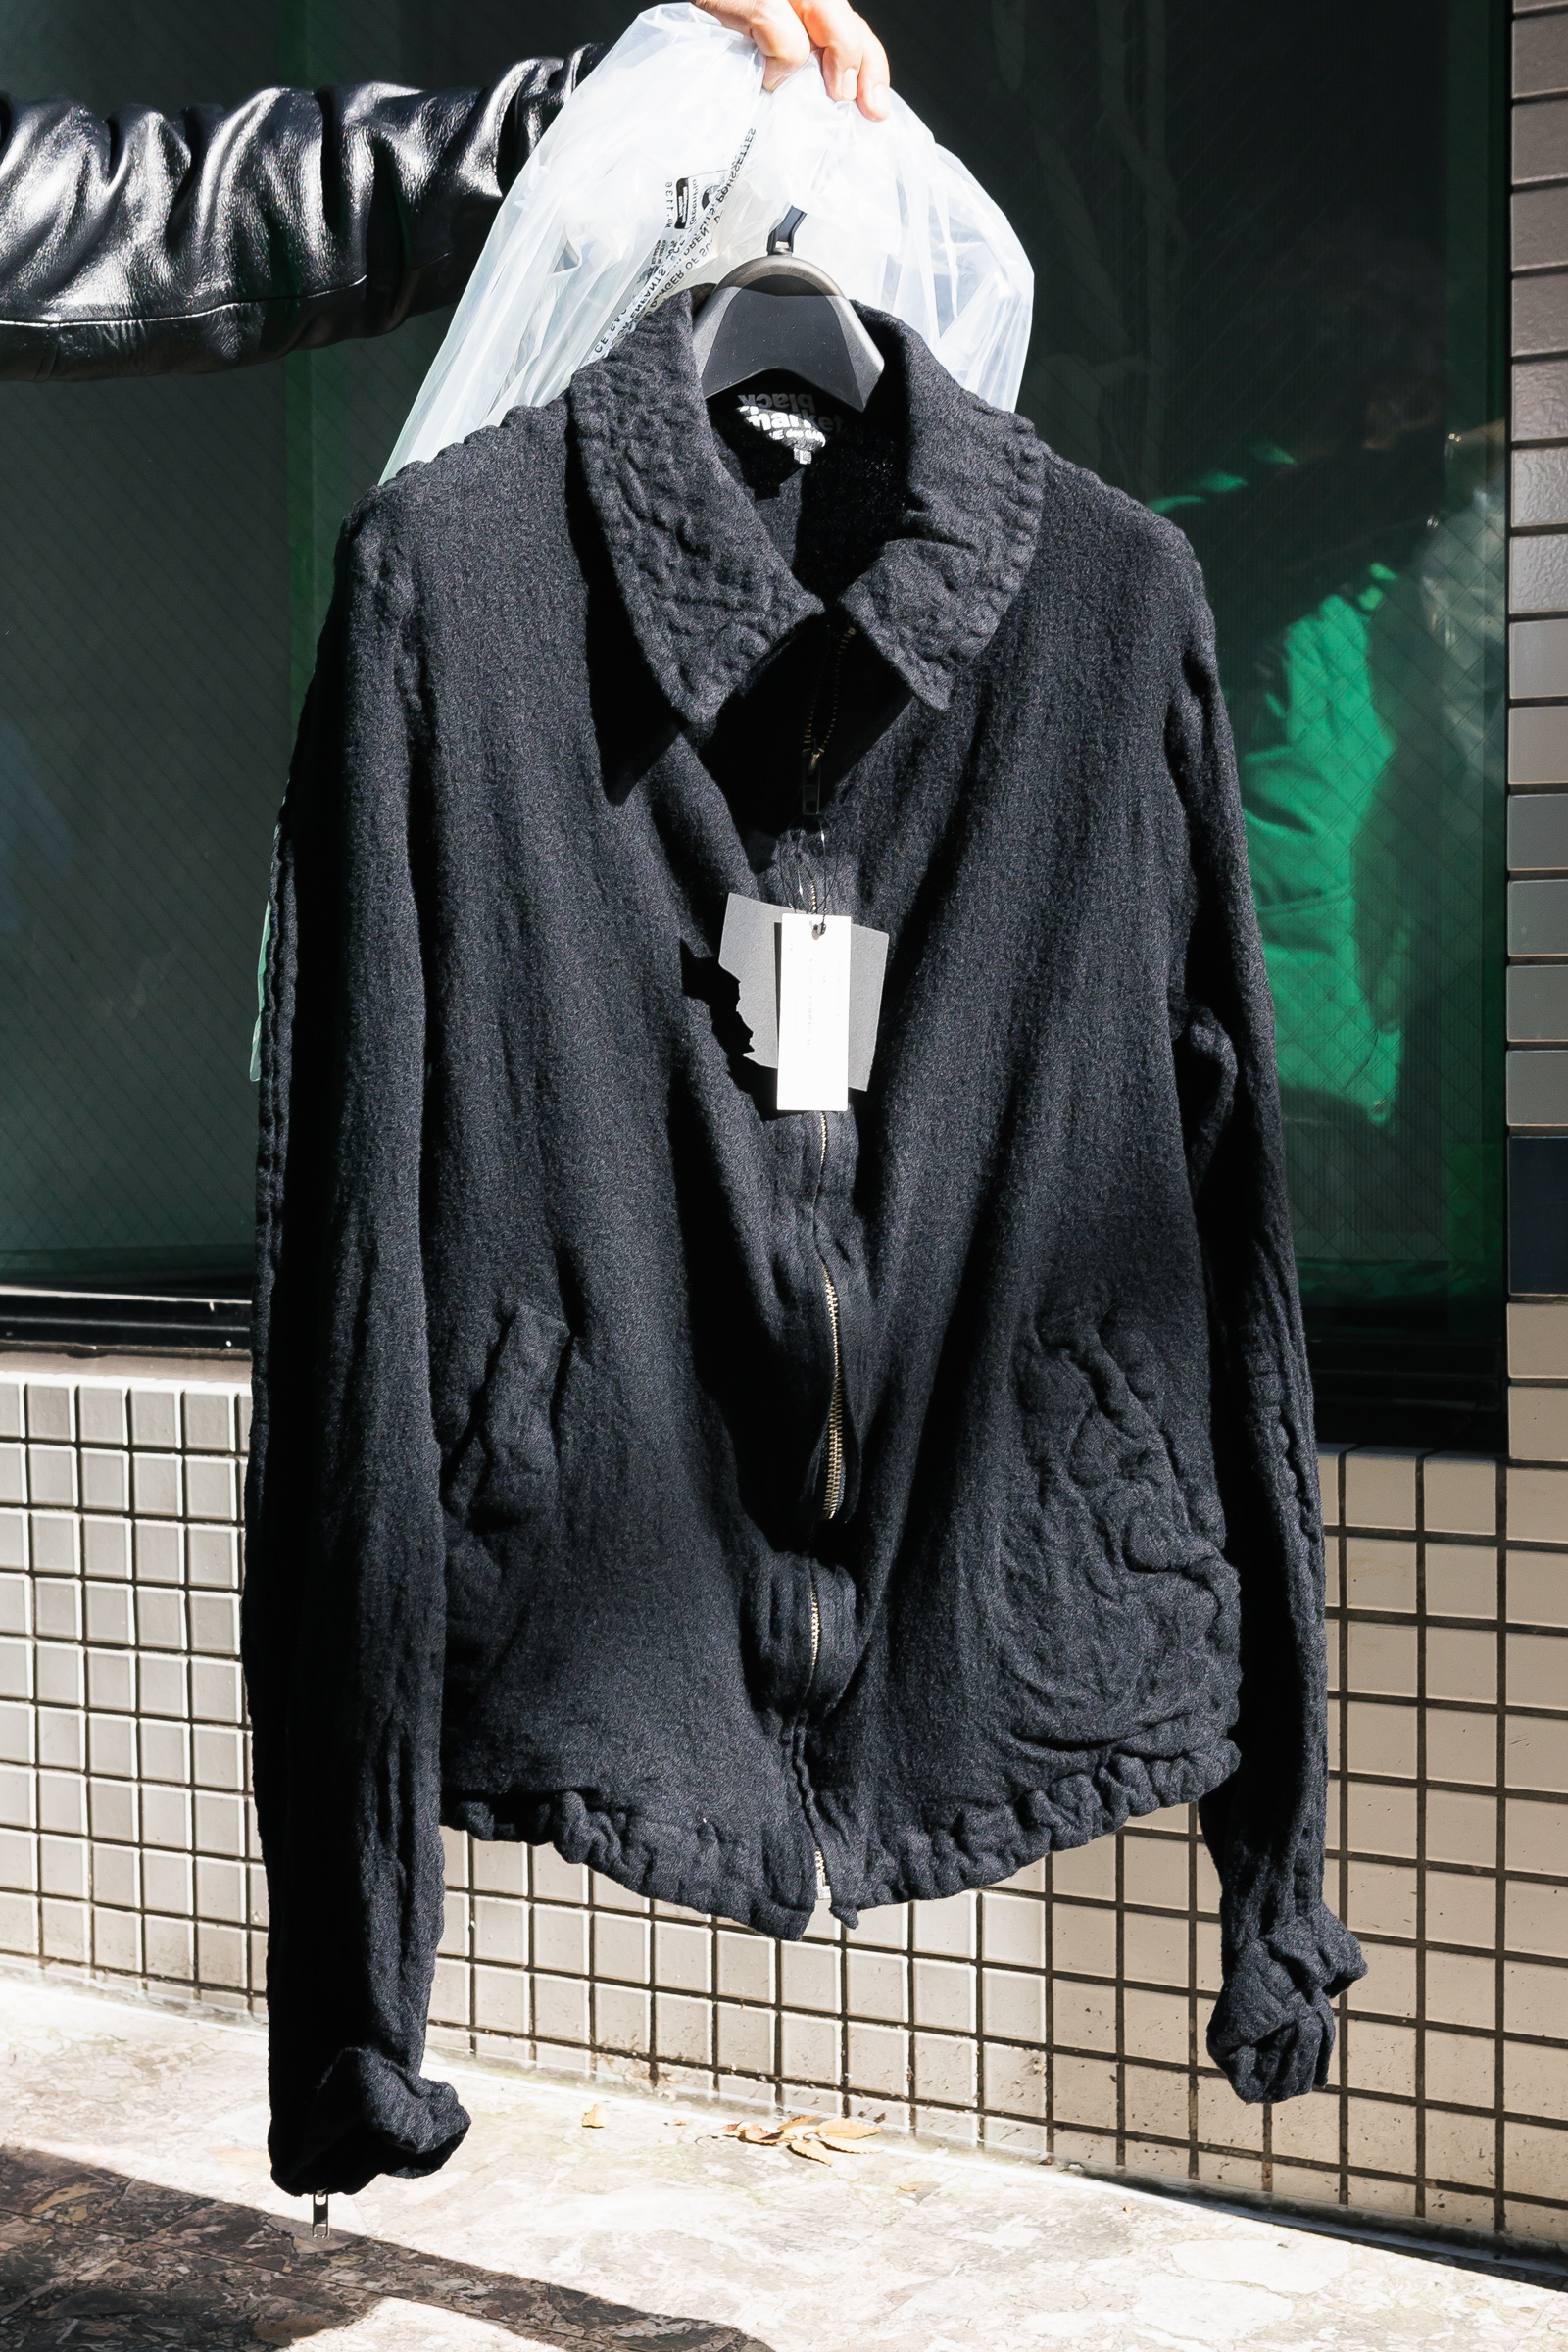 BLACK COMME des GARCONS 21aw ウール縮絨ブルゾン ジャケット